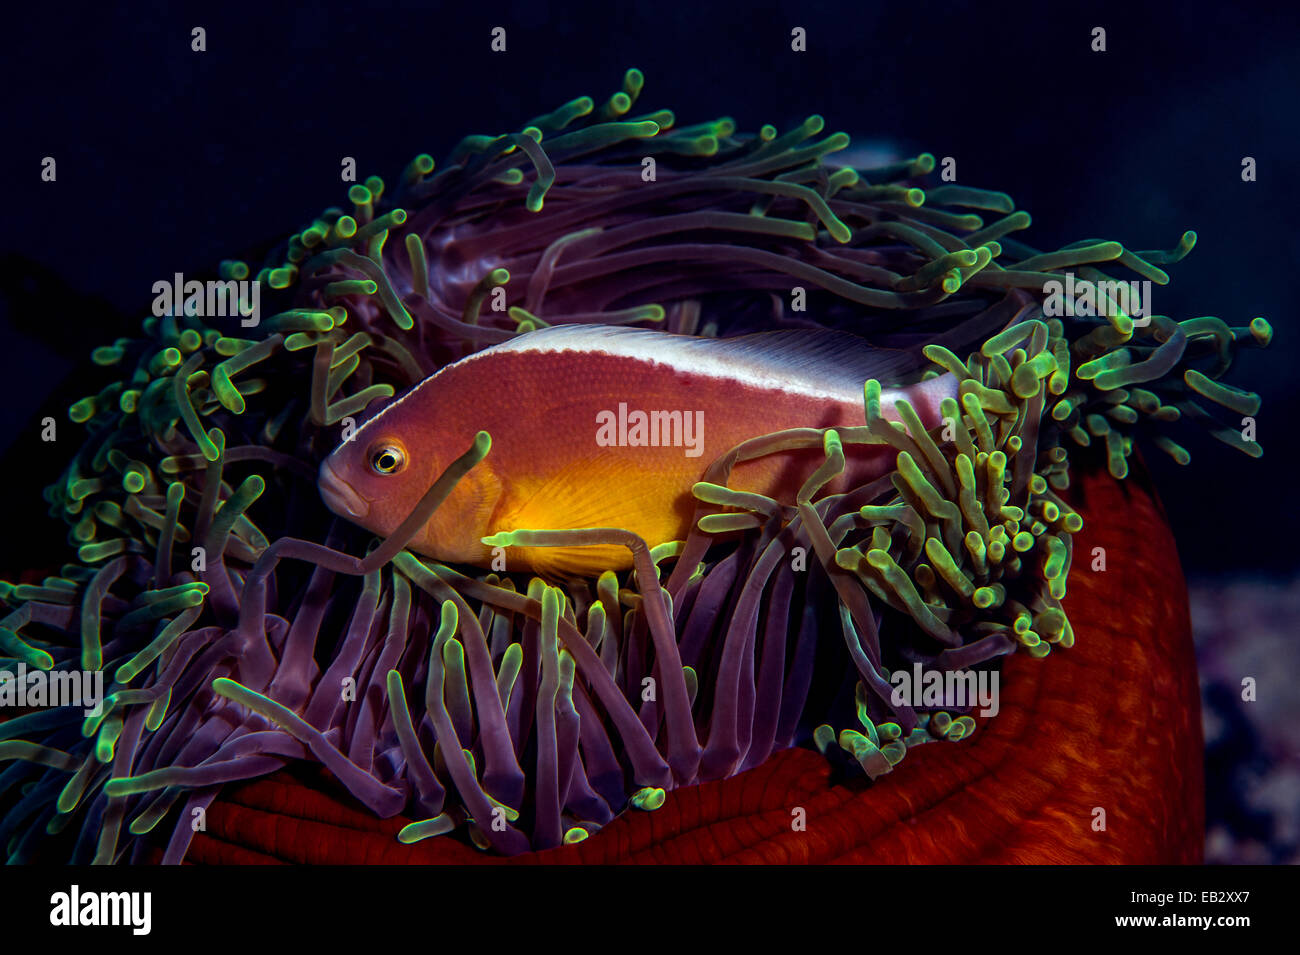 A skunk anemonefish swimming among the stinging tentacles of its anemone. Stock Photo